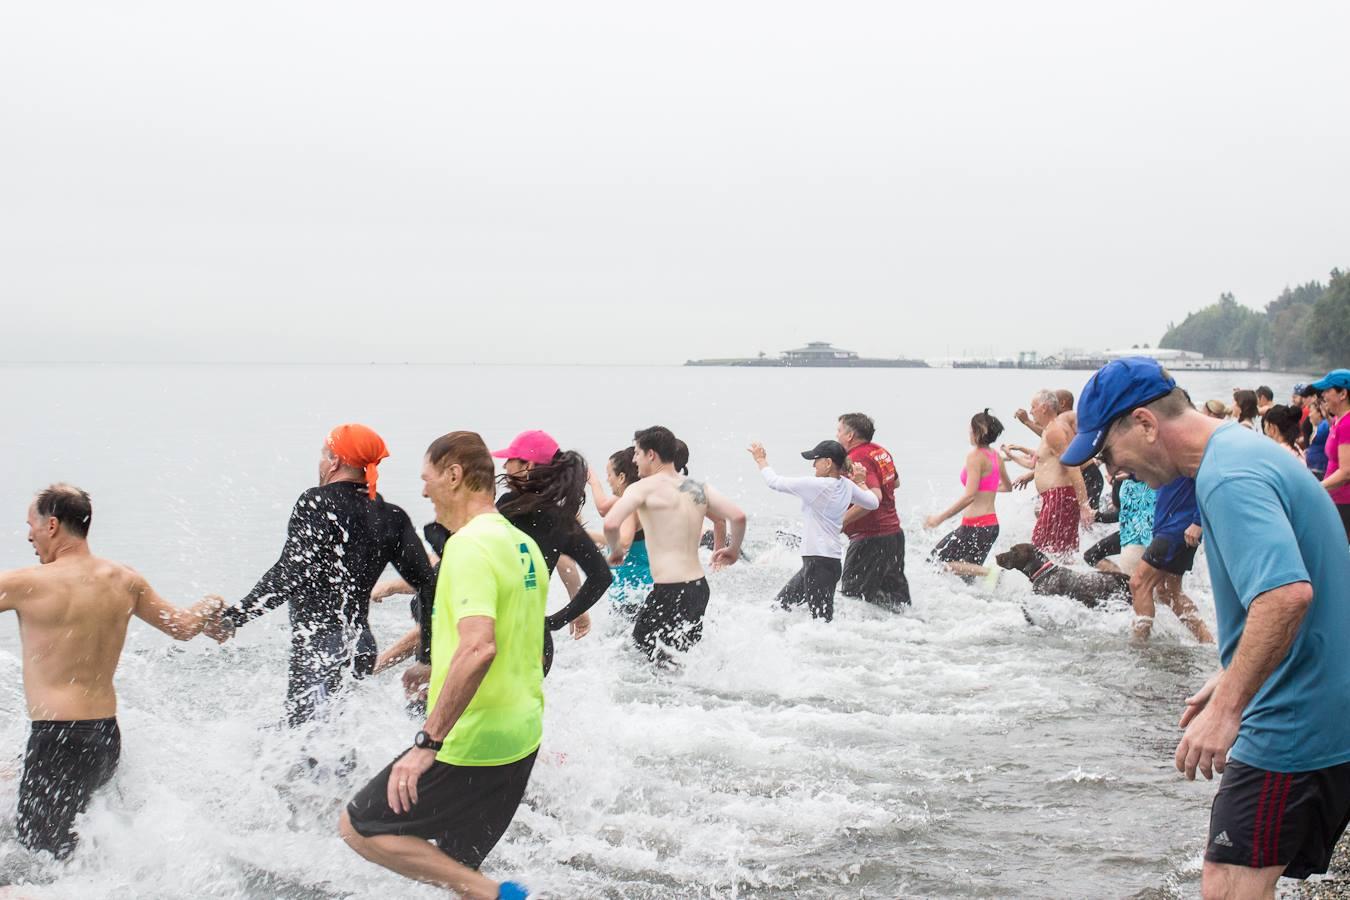 People run into the Puget Sound at the Plunge hosted by the YMCA